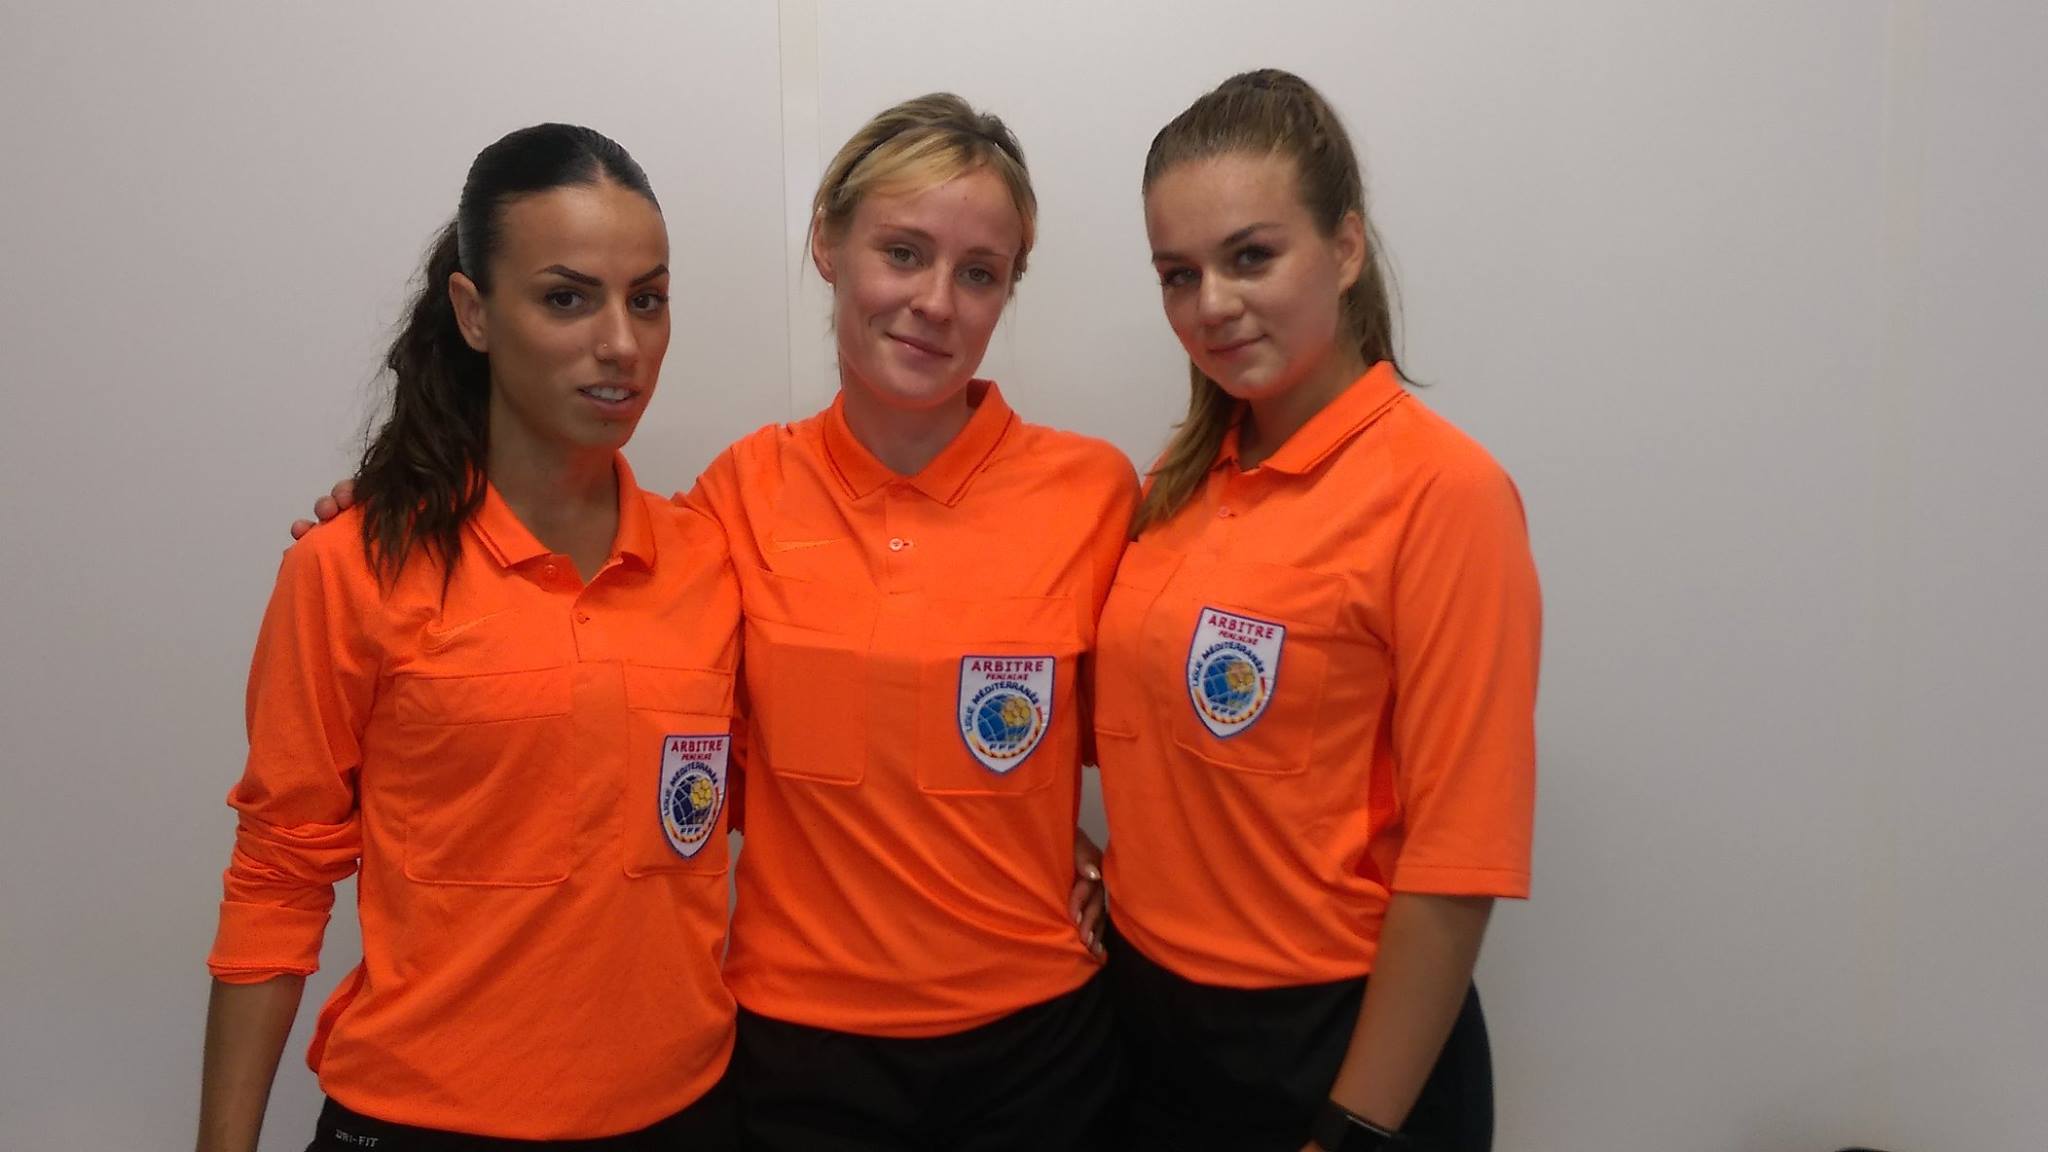 Female referees invited to kick off Ligue 1 men's matches